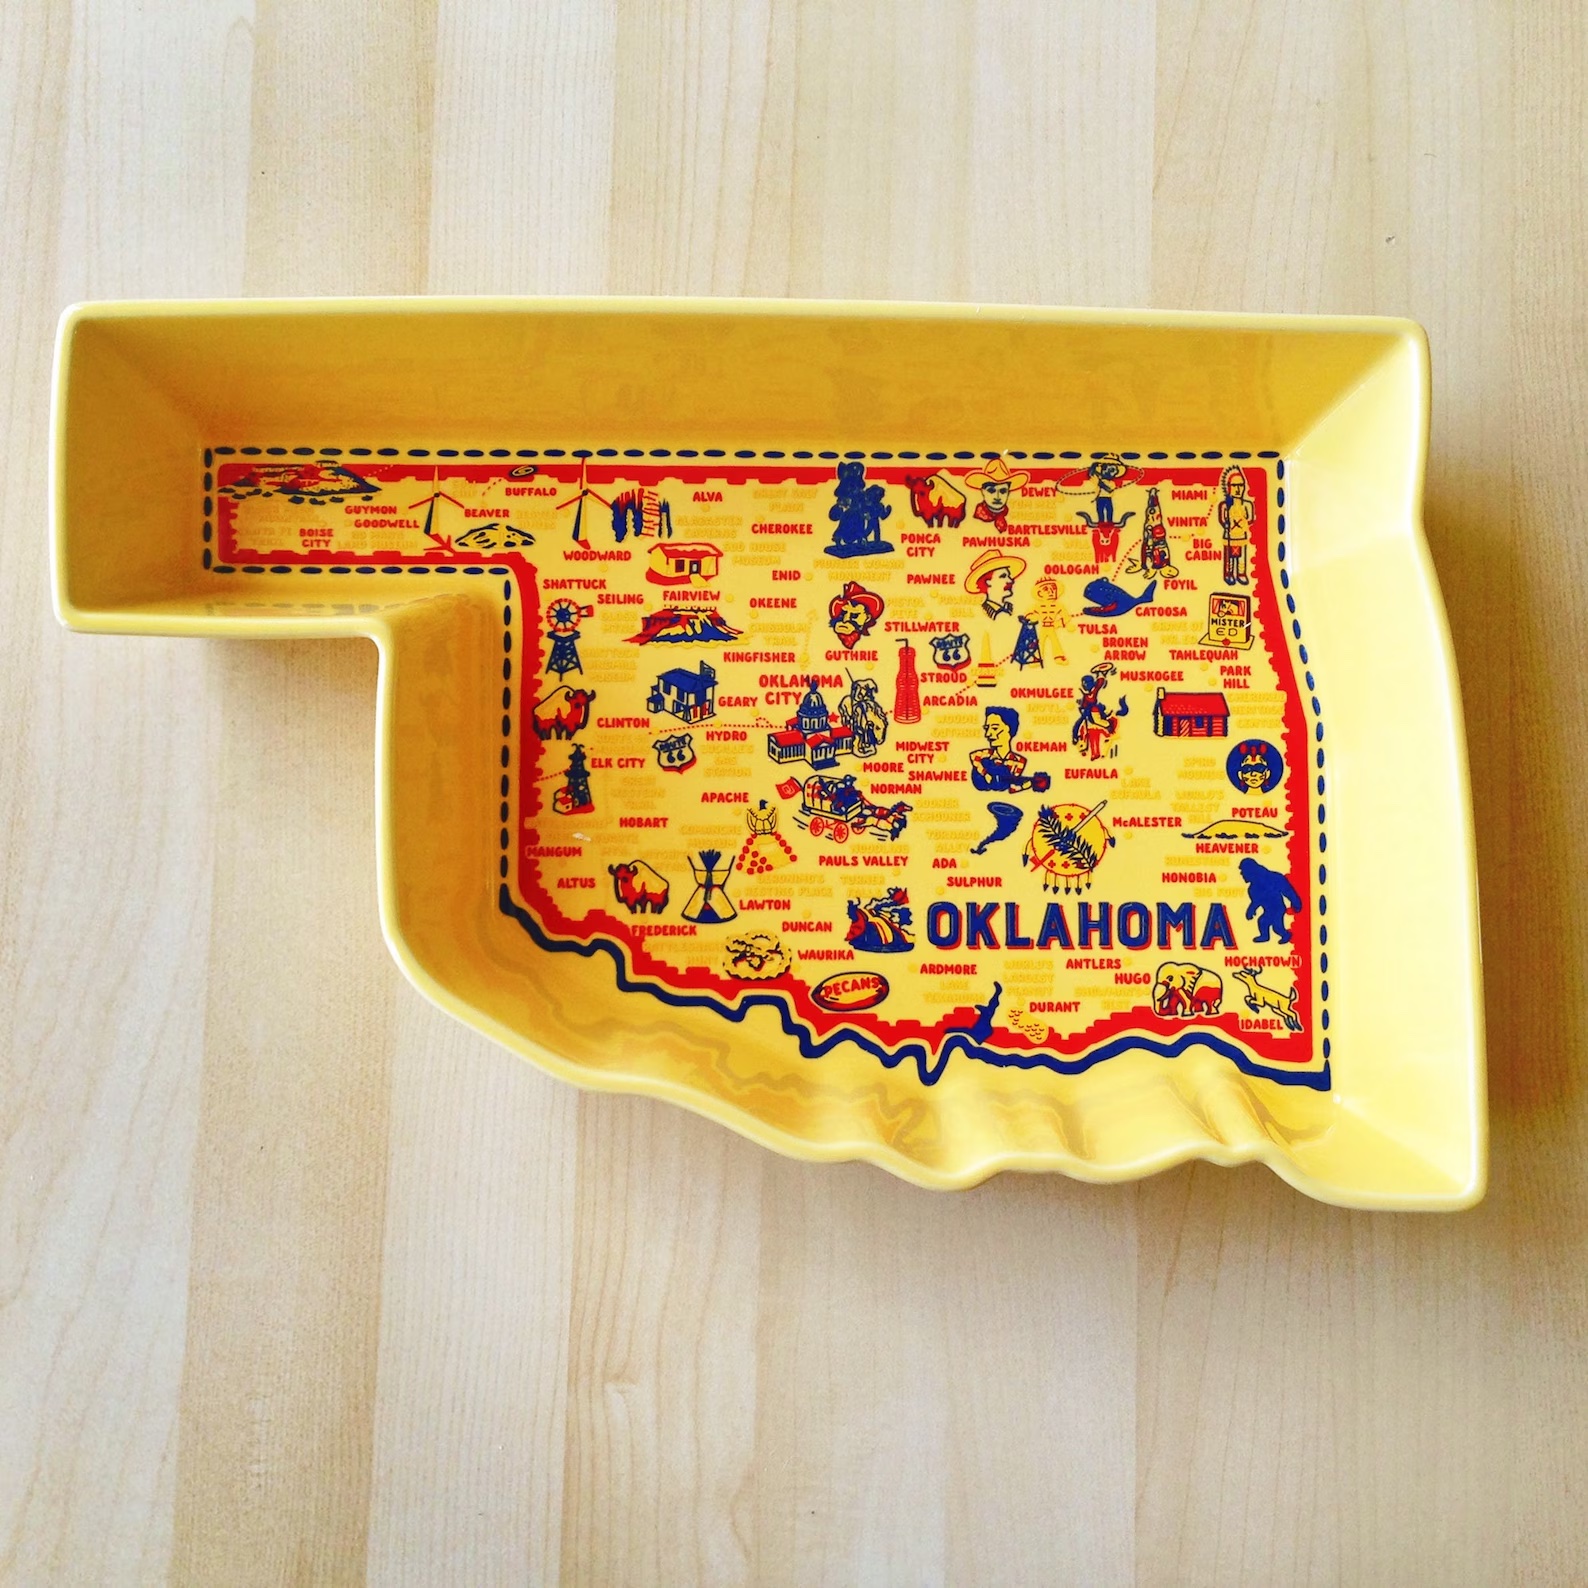 A yellow casserole dish shaped like Oklahoma with small illustrations of state landmarks on the bottom